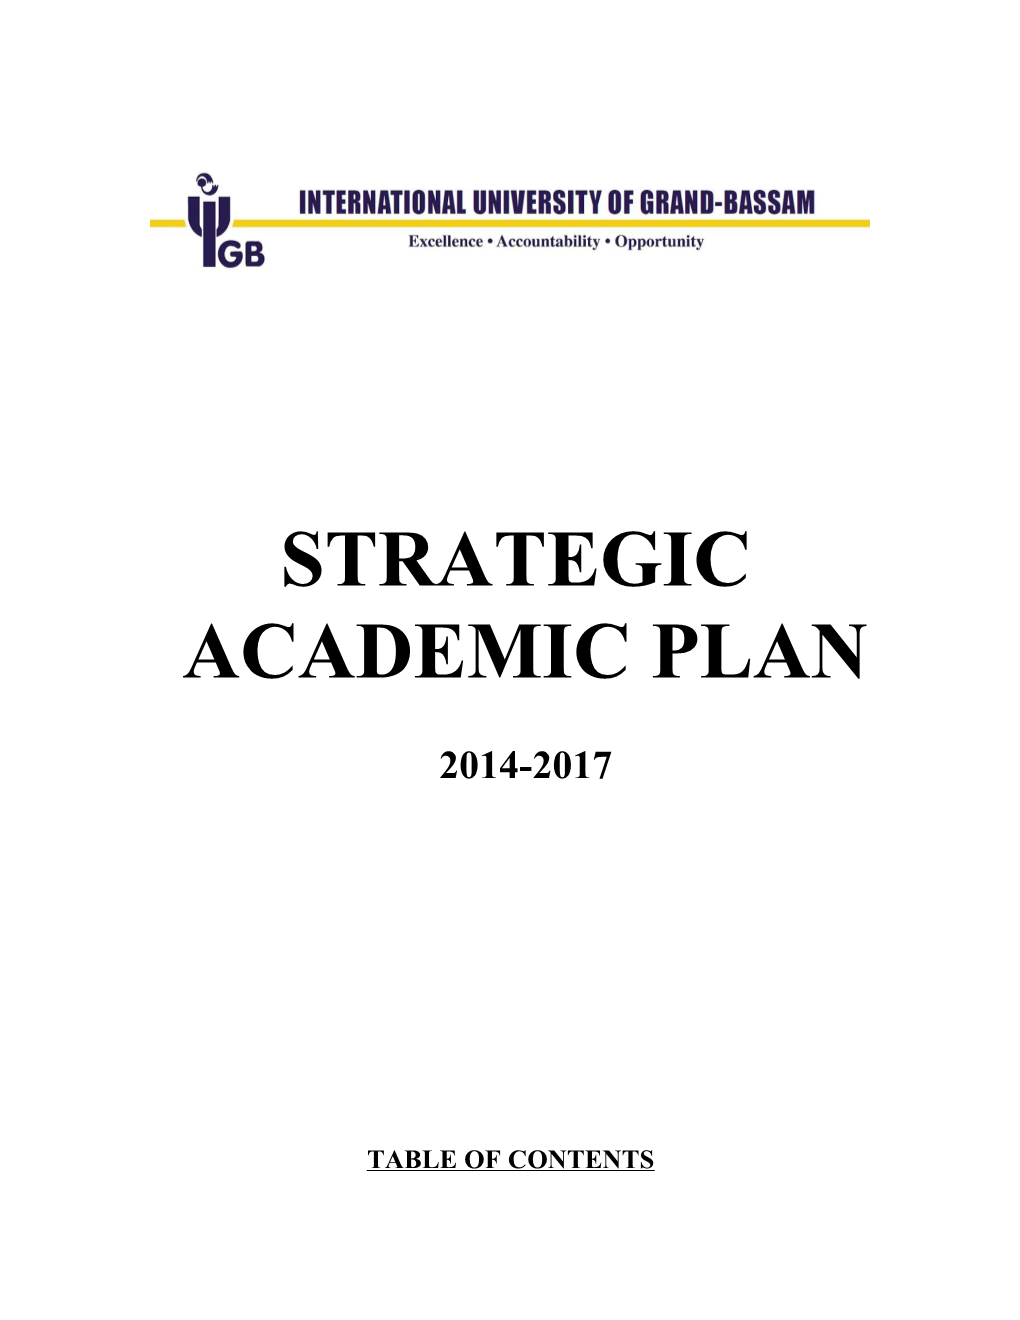 Strategic Academic Plan List of Sections